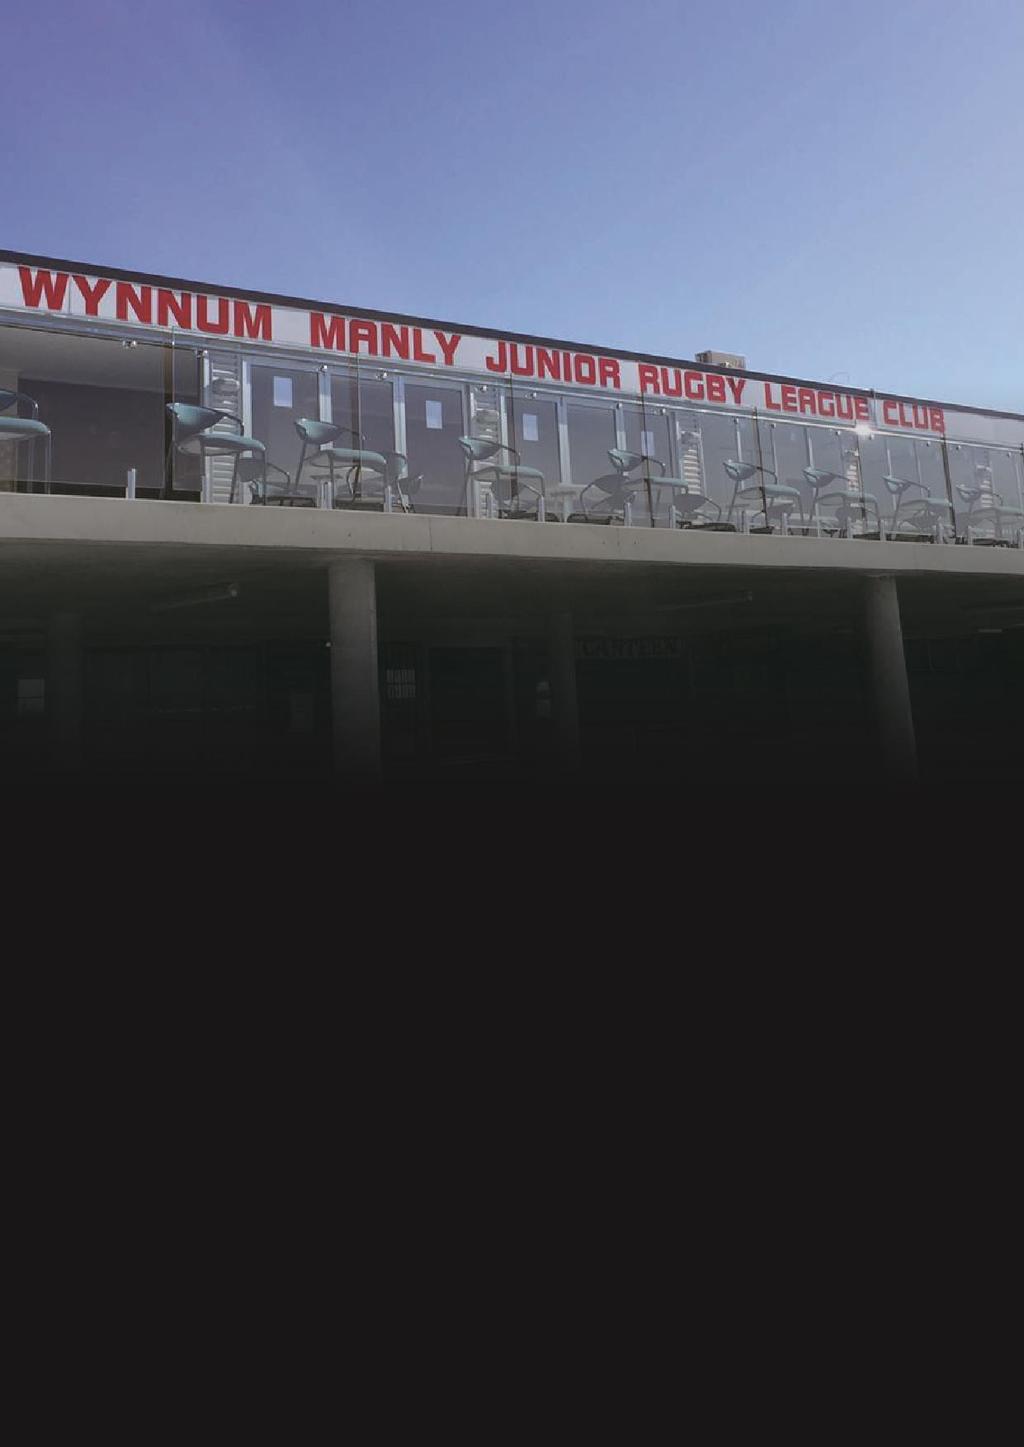 Welcome to the Wynnum Manly Junior Rugby Leagues Club Use this Function & Catering Guide to help